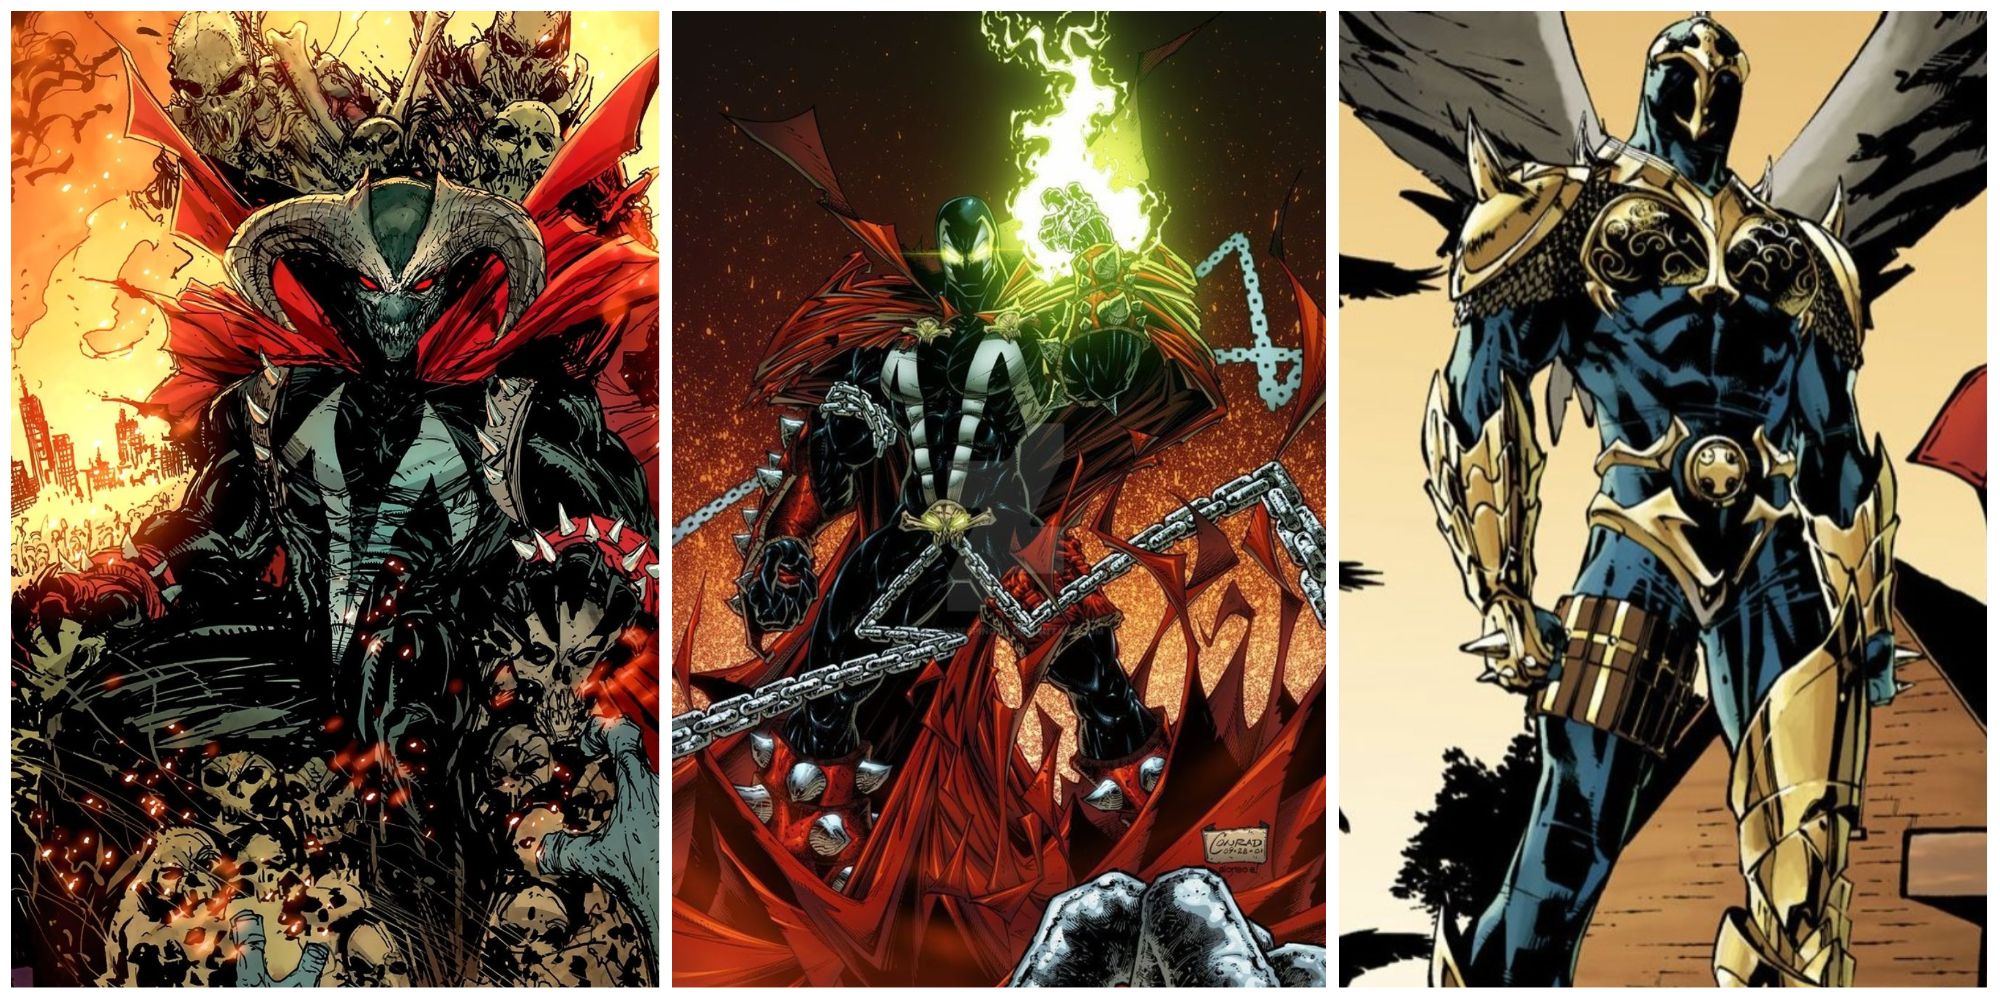 A split image of Spawn Omega, Al Simmons' Spawn, and Redeemer in Image Comics